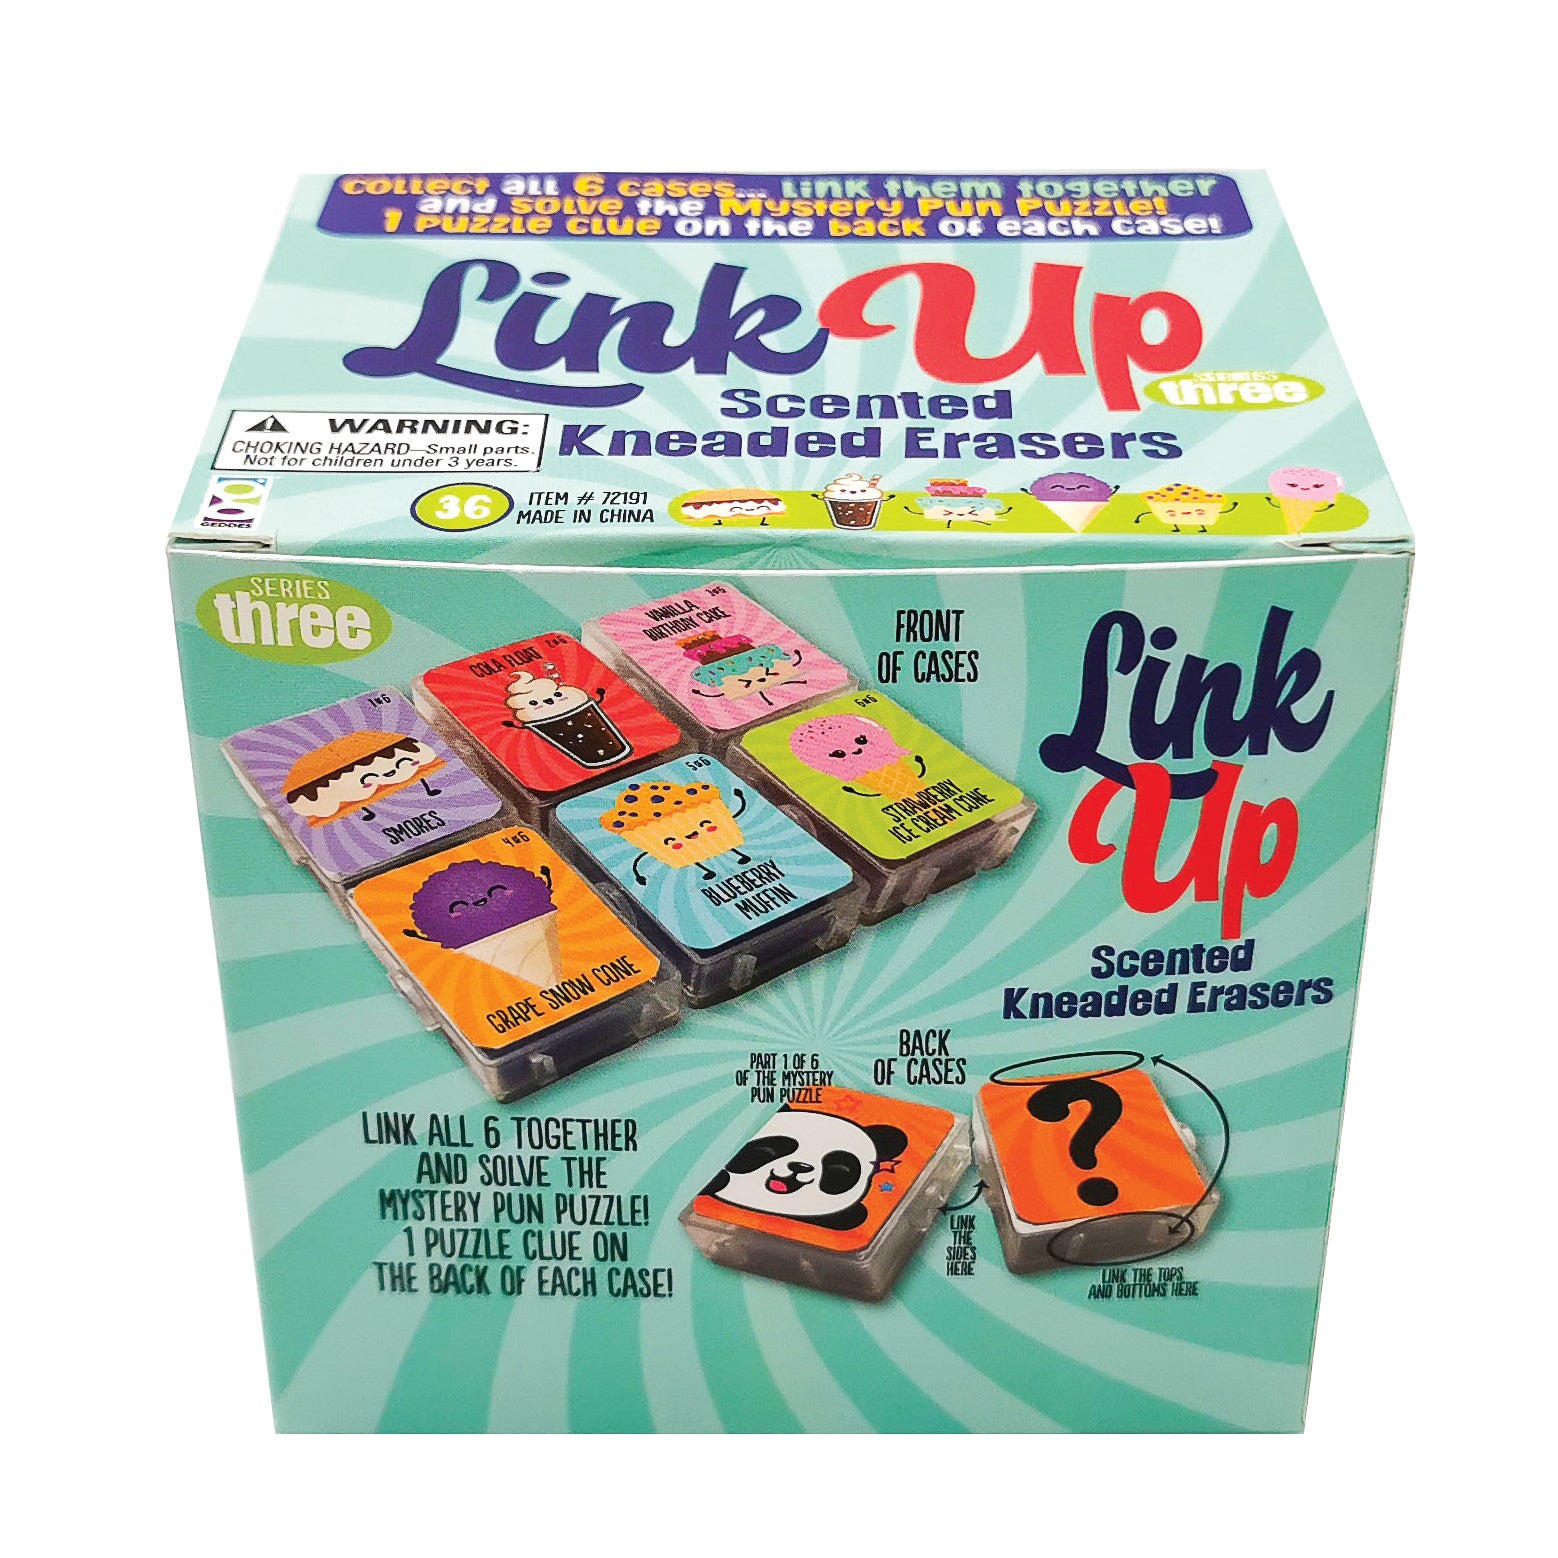 Link Up Scented Kneaded Erasers: Series Three